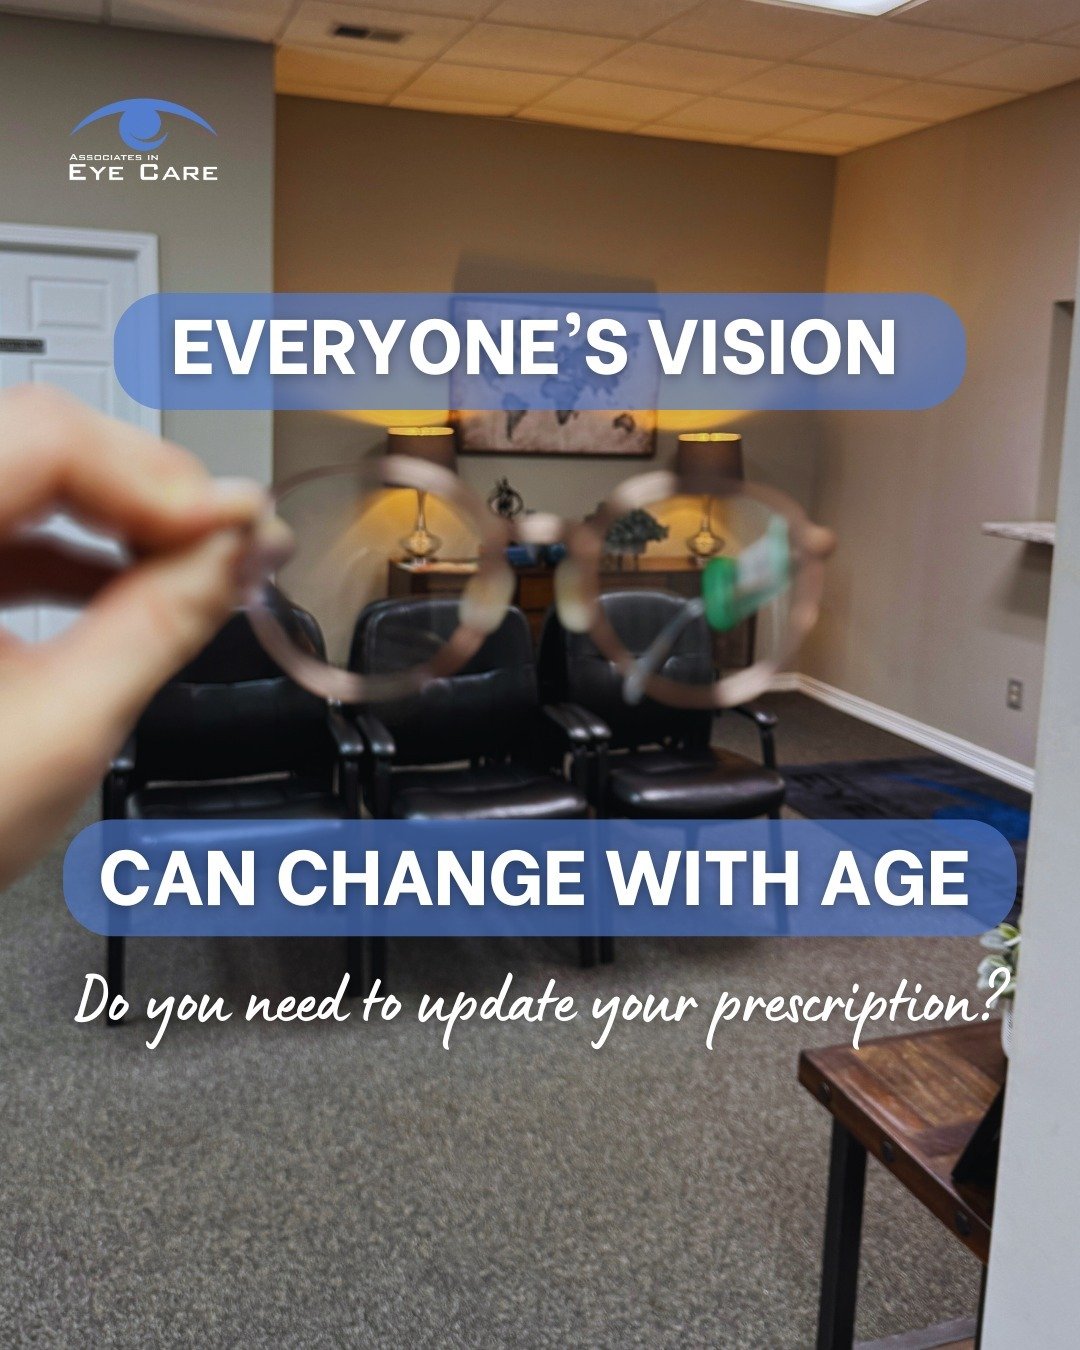 Reasons why you shouldn't skip your eye exam:
👉 You may have an eye disease that we can diagnose early on for more effective treatment
👉 They help monitor your overall health
👉 We can update your corrective prescriptions
👉 Address any eye strain 